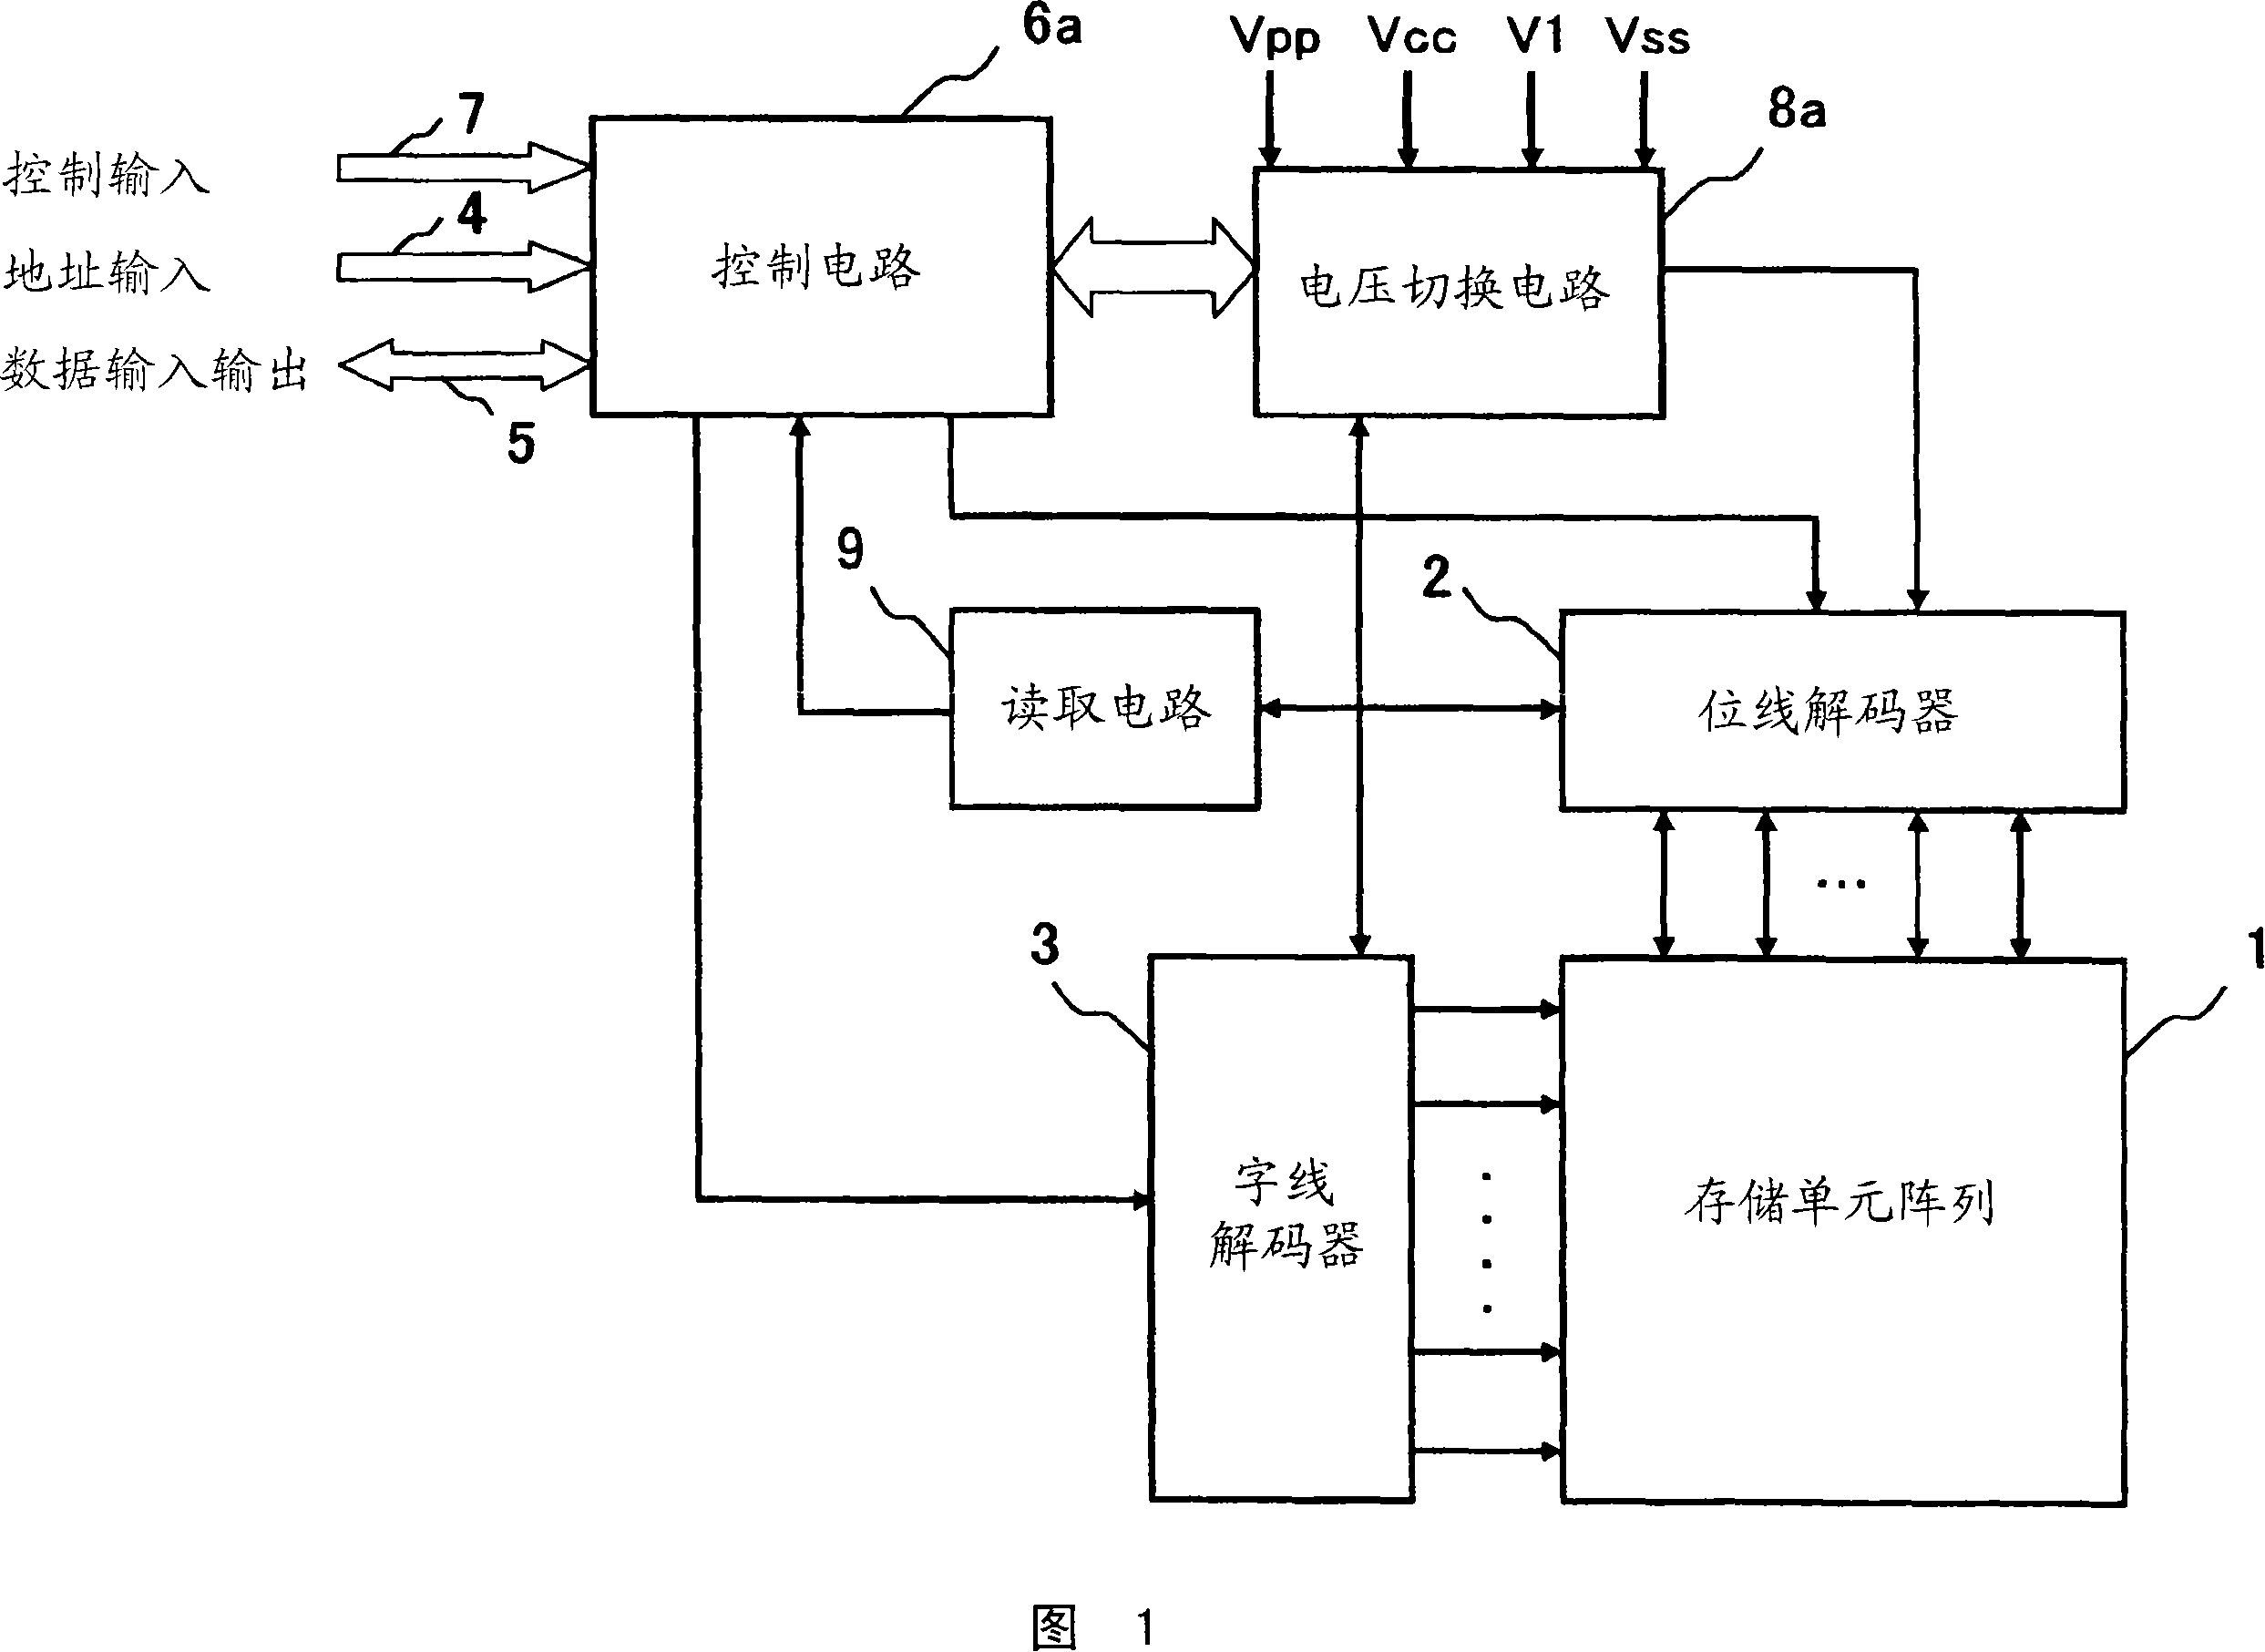 Nonvolatile semiconductor storage device and method for operating same